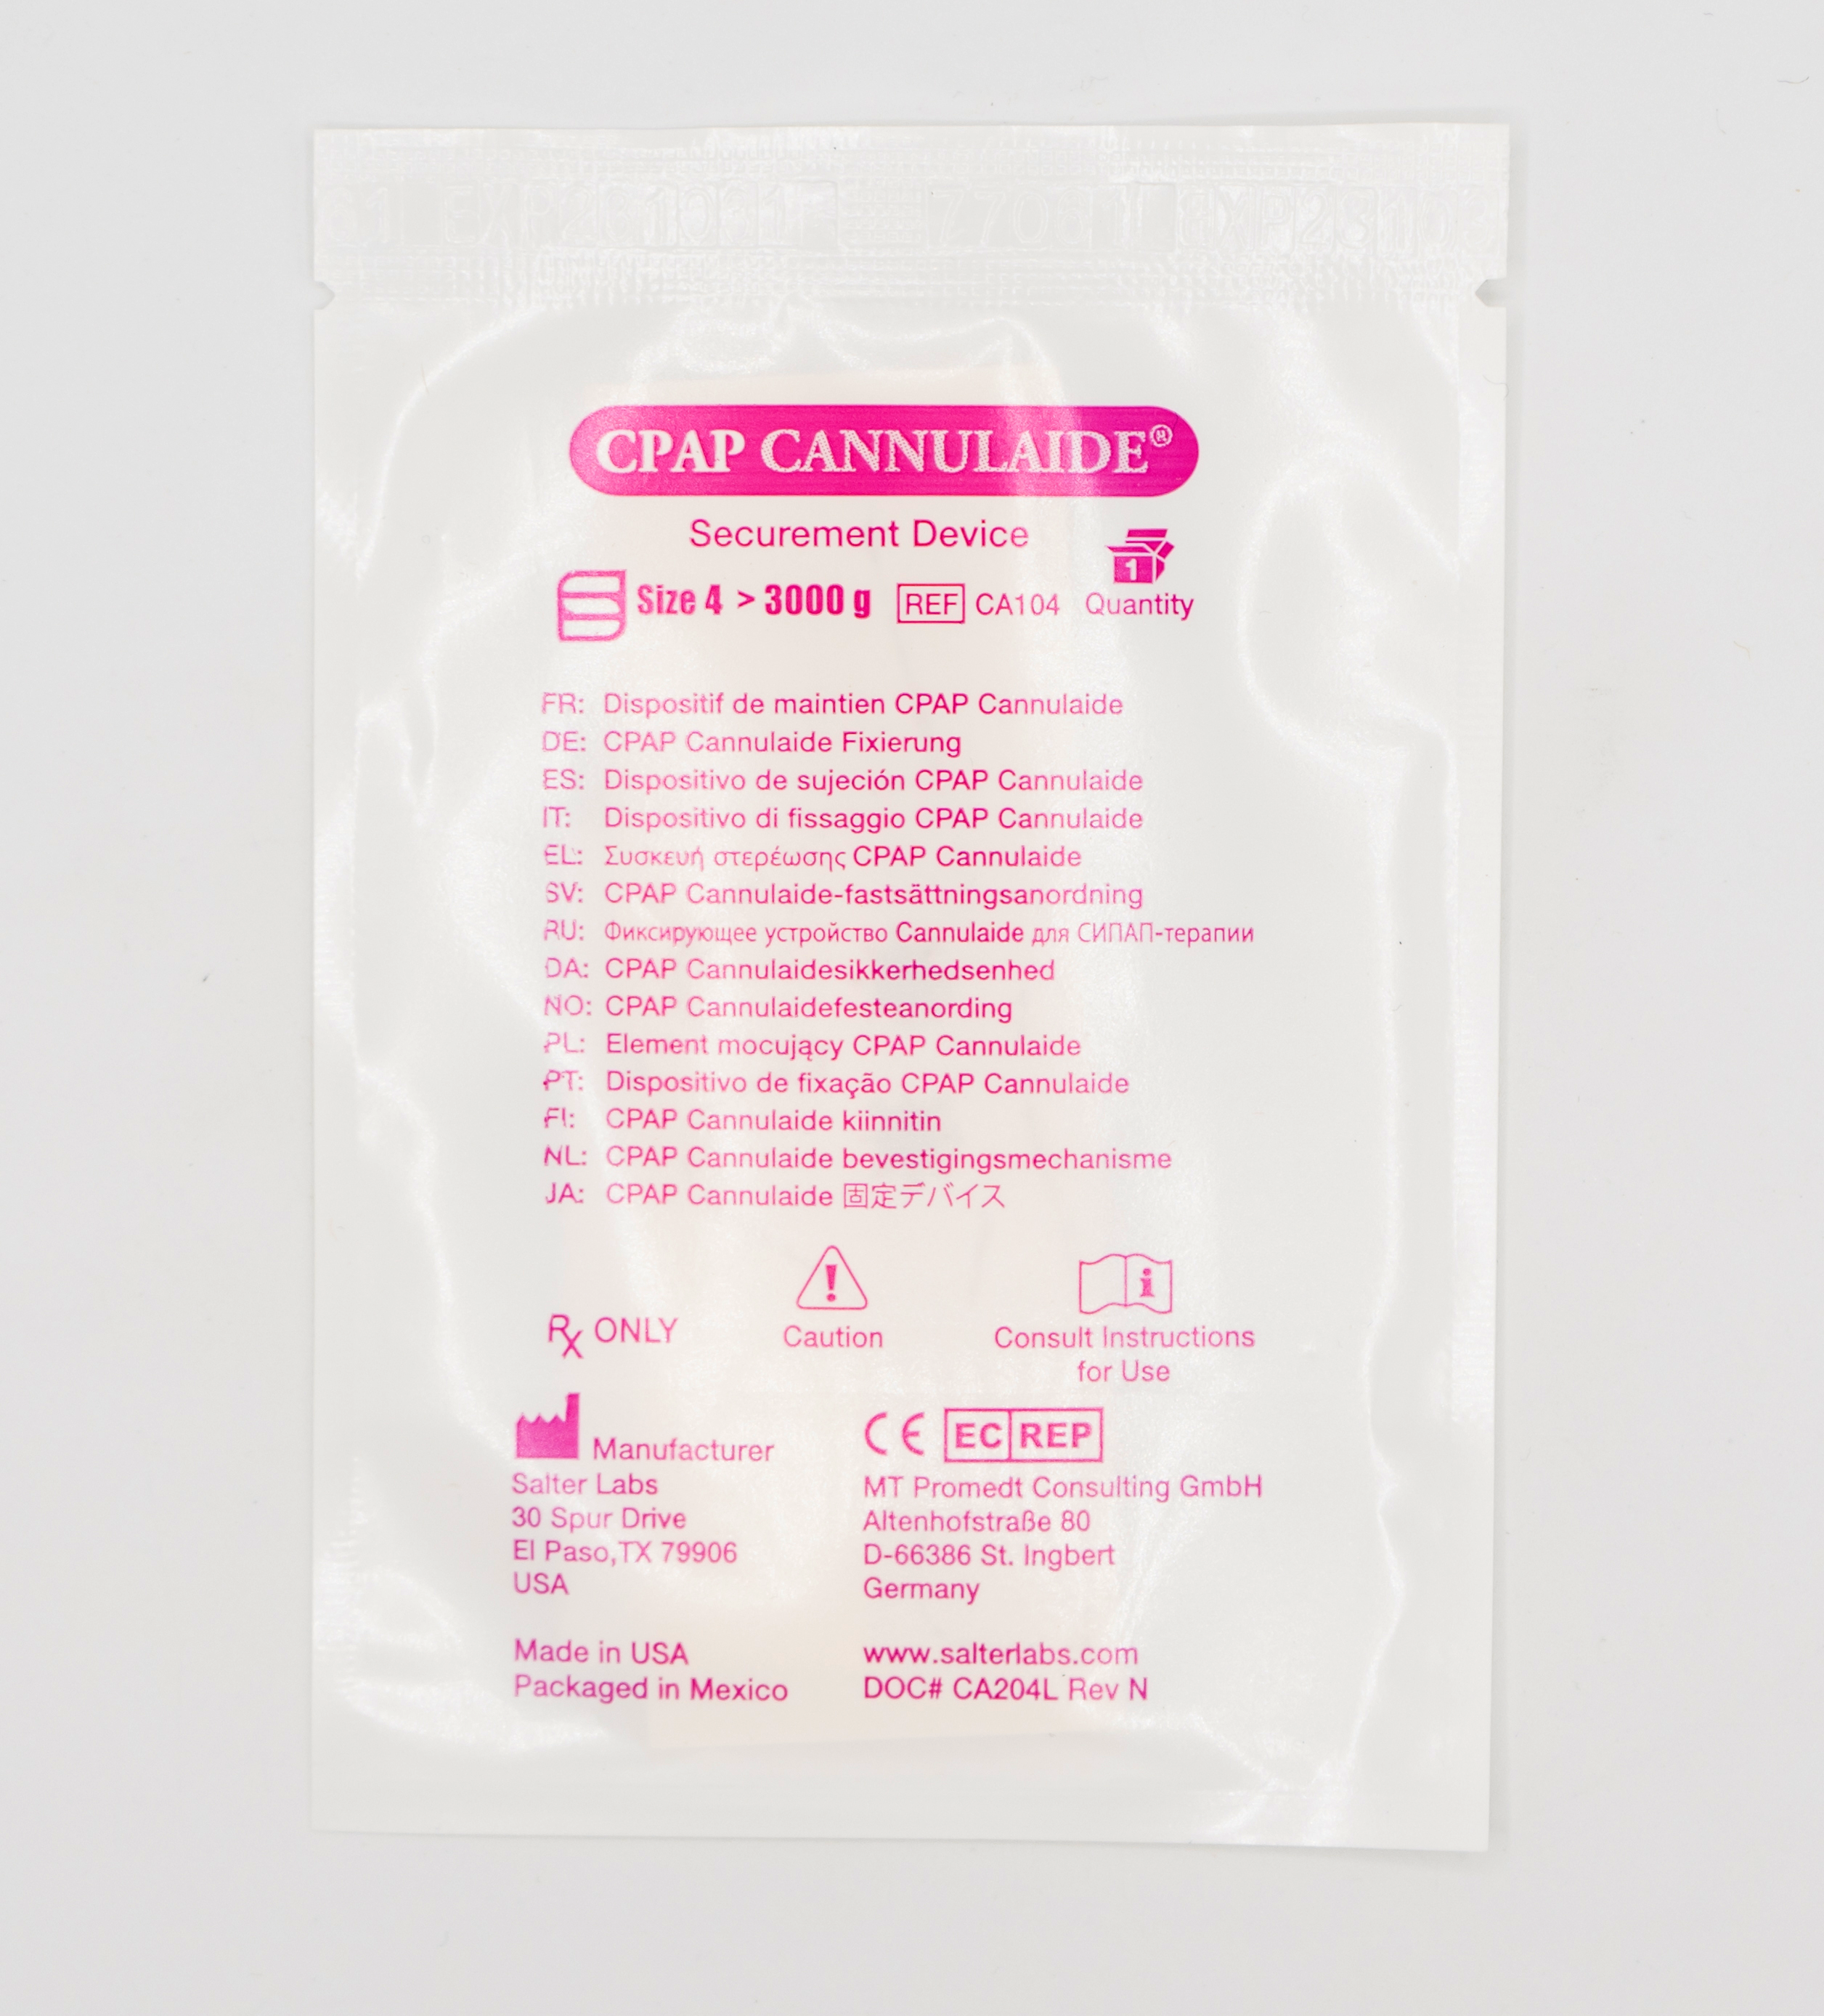 CPAP Cannulaide® Securement Device CA104-0-25 | Size 4, for babies >3000g